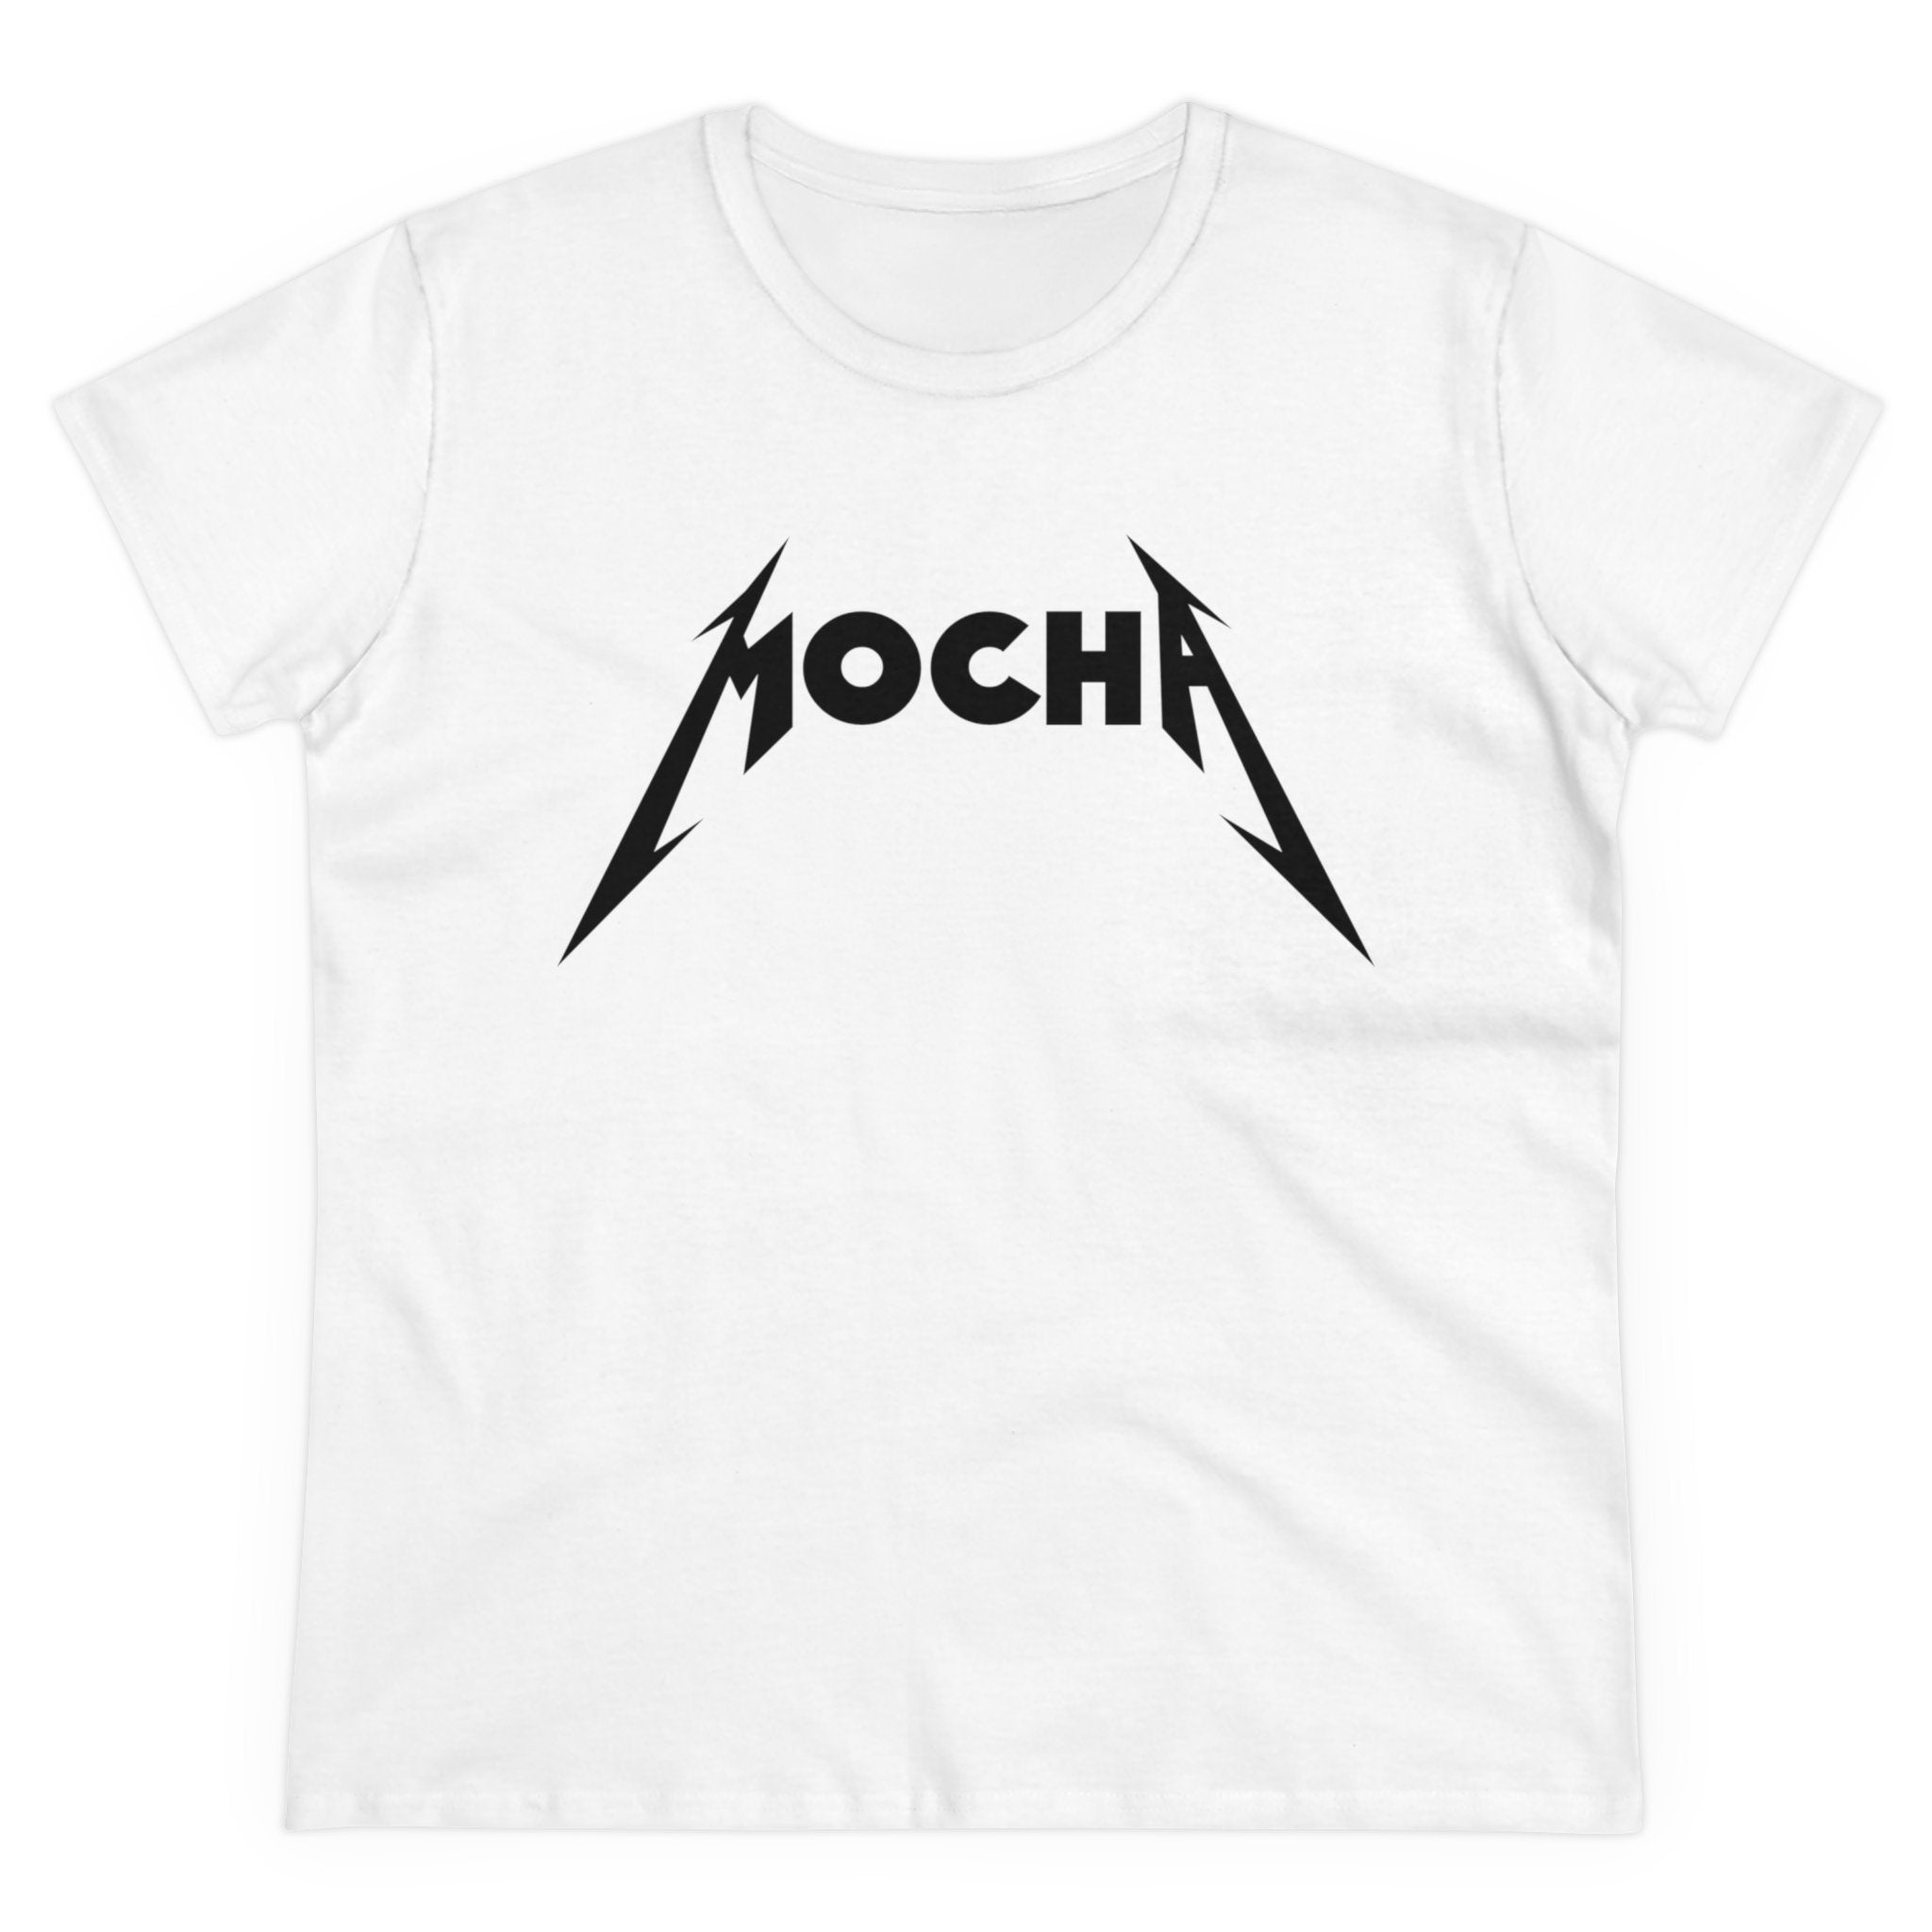 White T-shirt crafted from soft light cotton, featuring the word "MOCHA" in black with lightning bolt accents on either side. This Mocha - Women's Tee is pre-shrunk for a perfect fit.